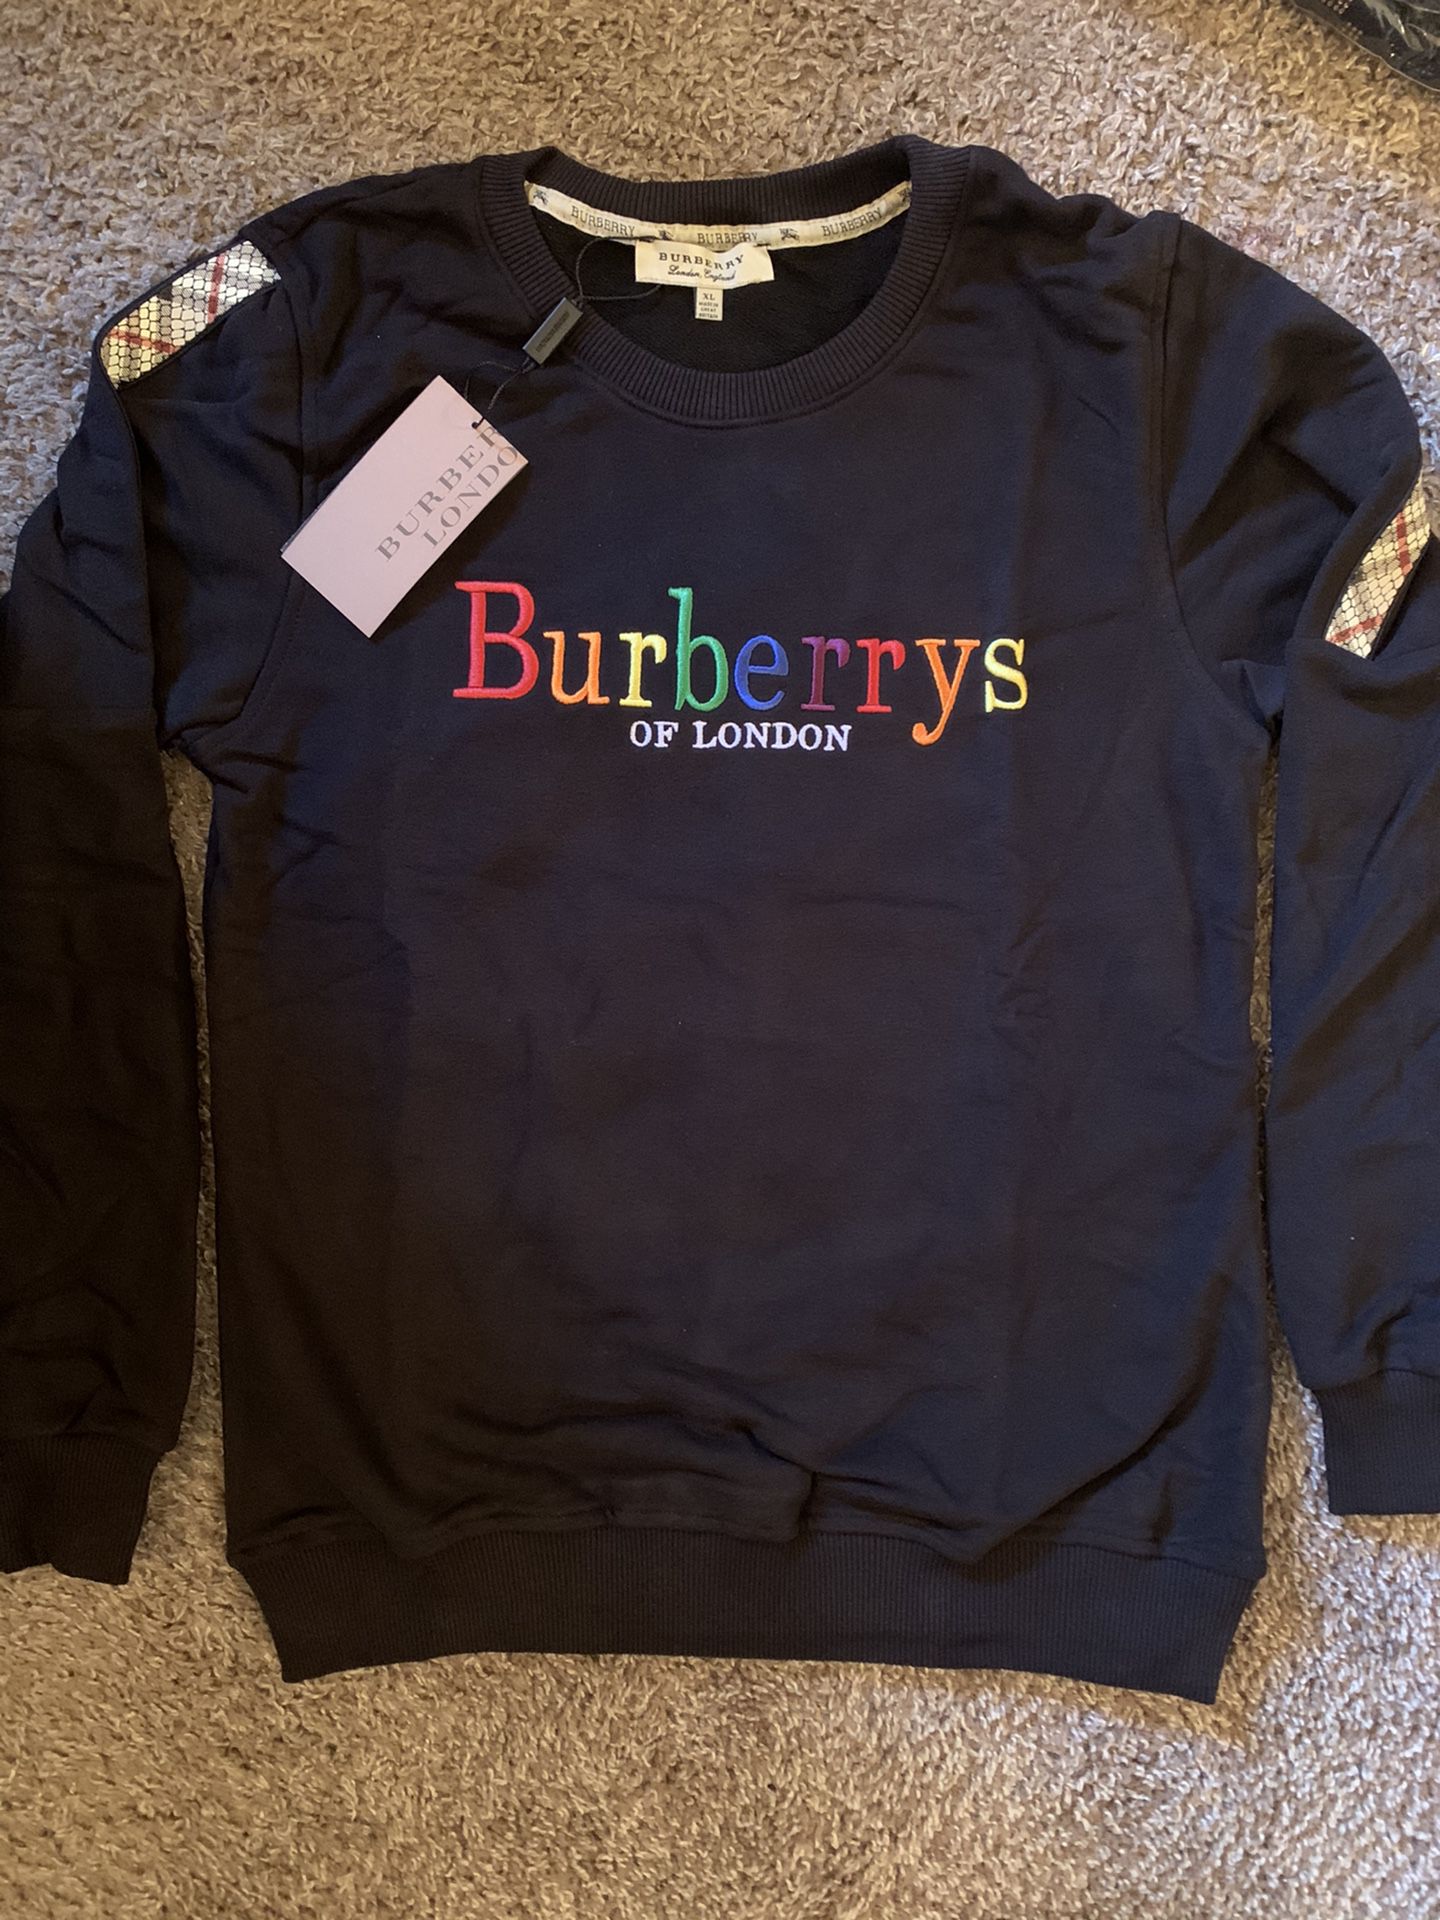 Burberry top. Size XL.